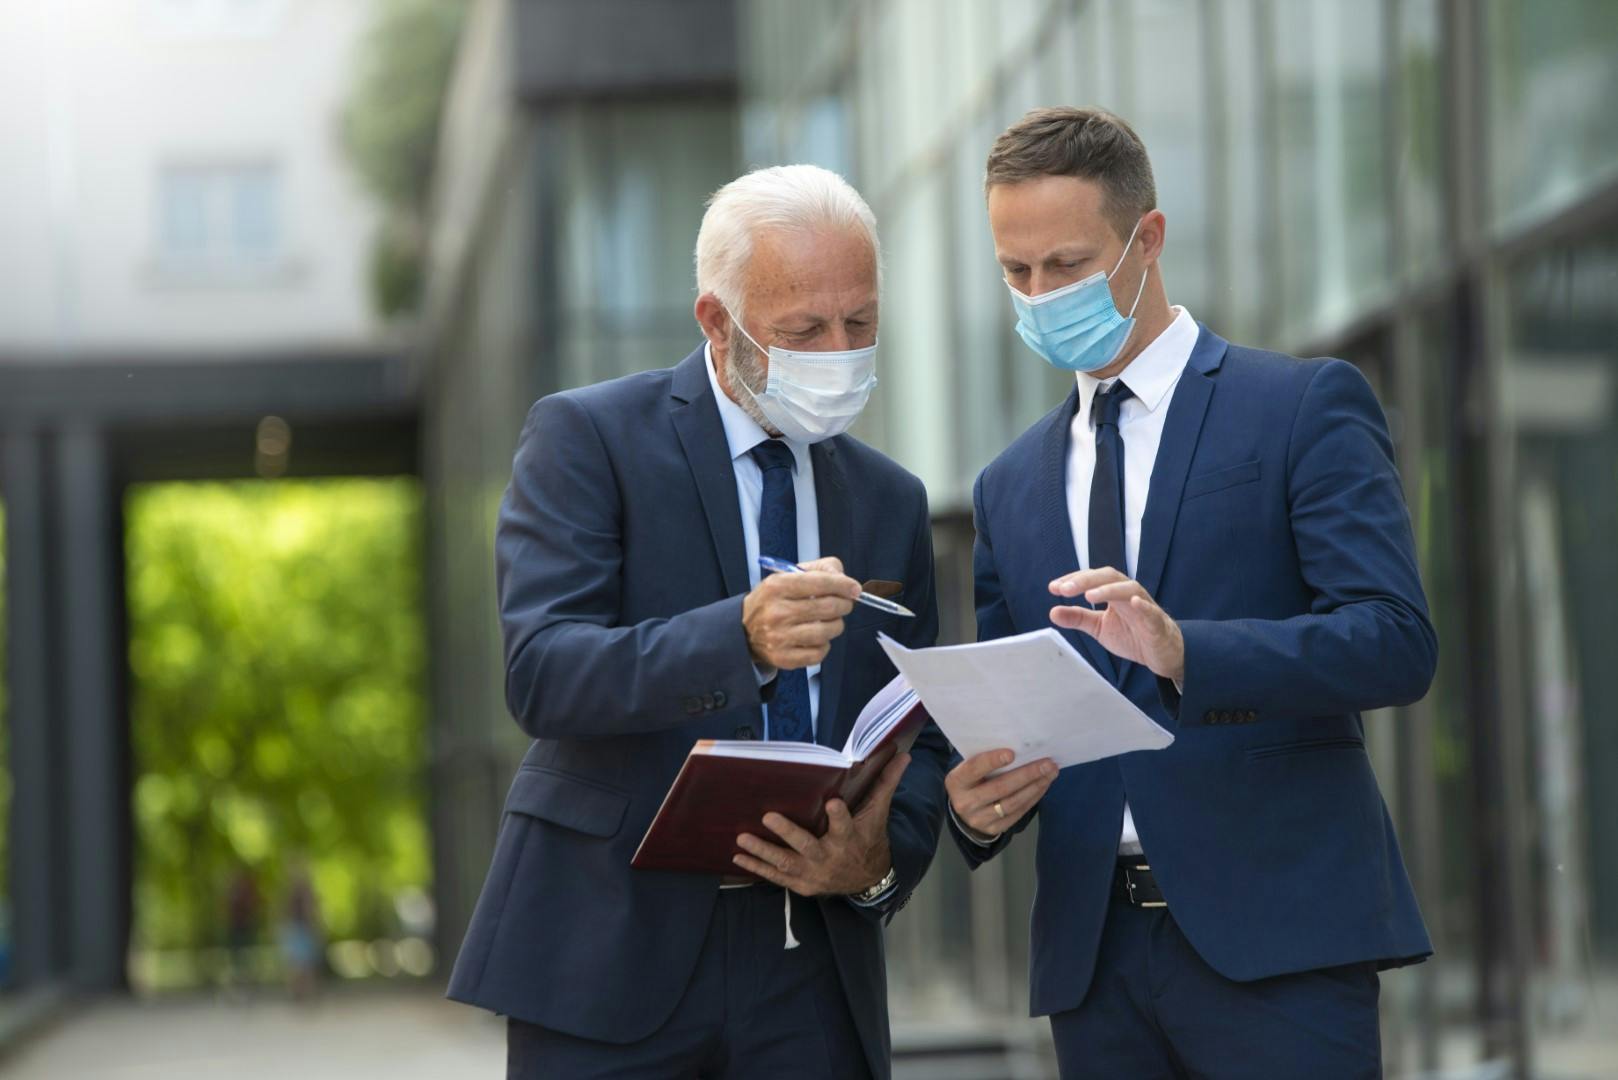 2 men in suits outside offices with face coverings